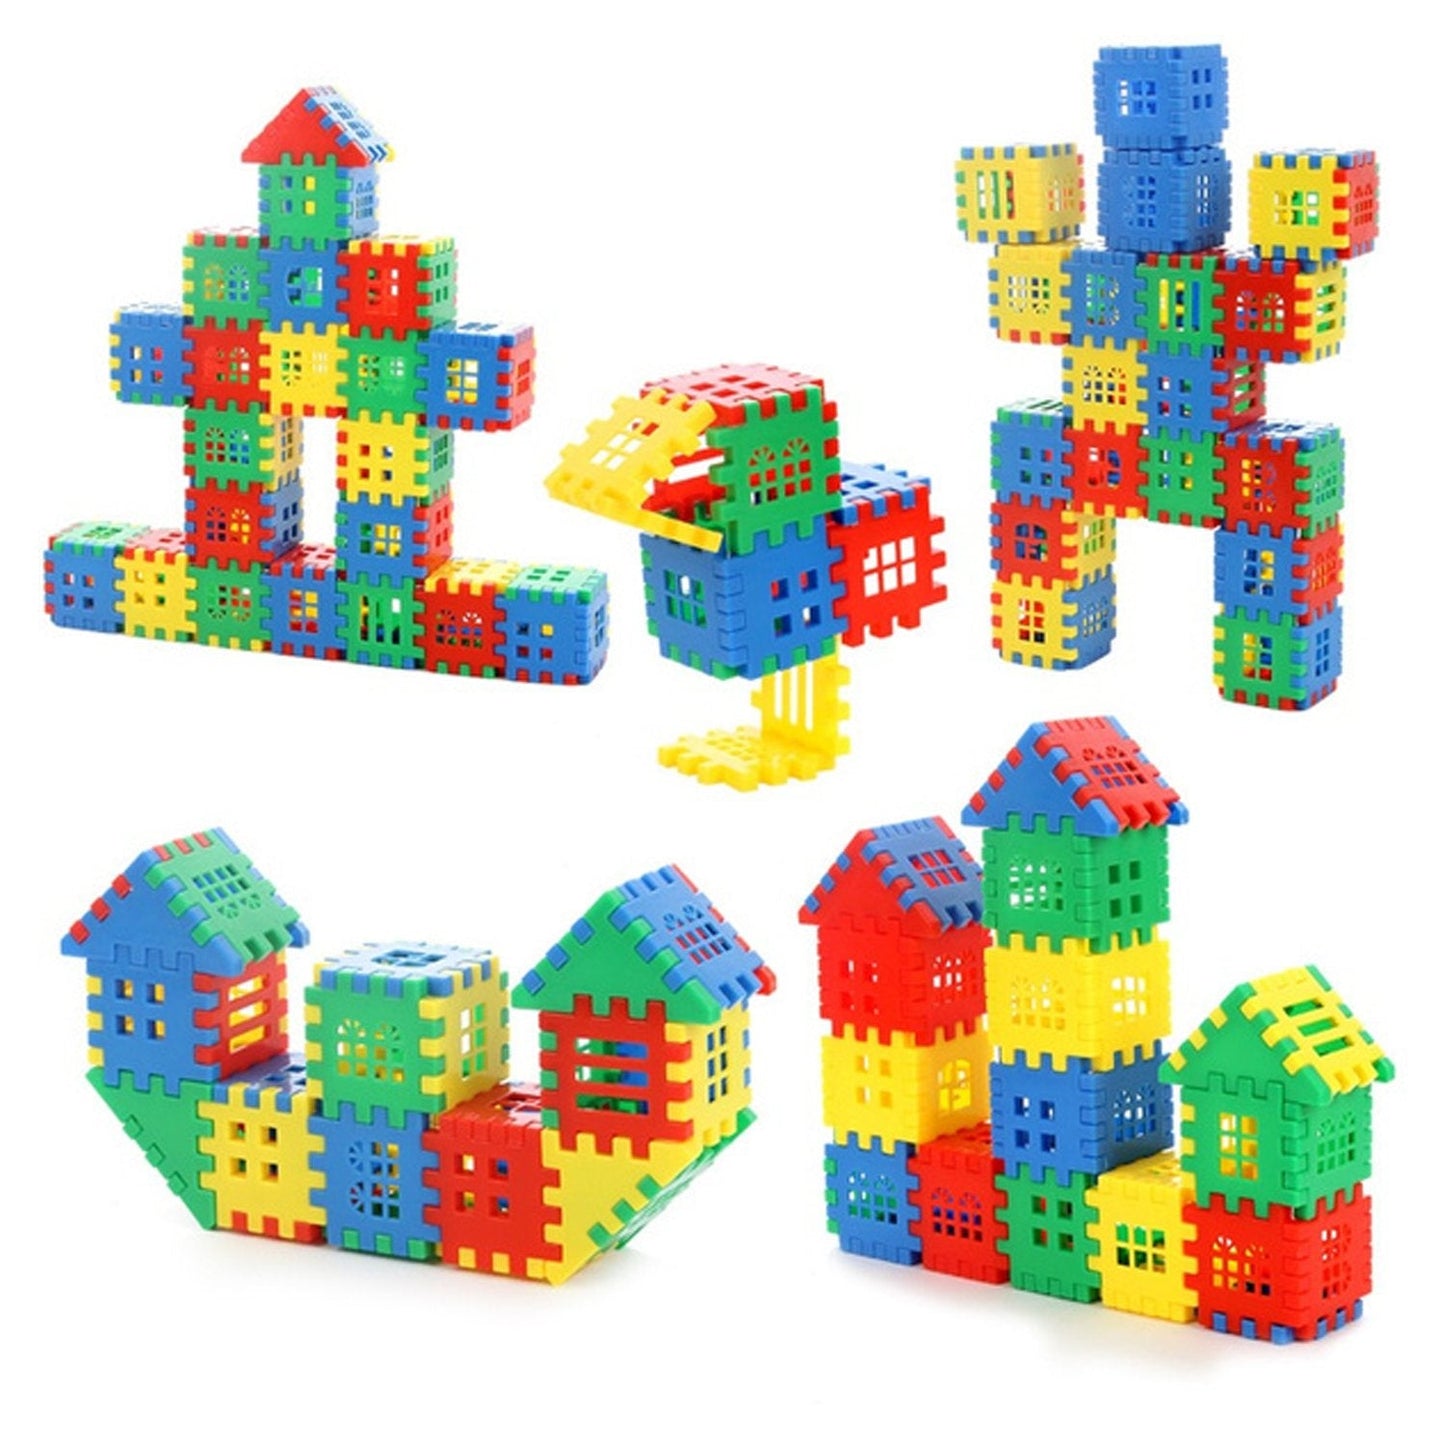 3910 72 Pc House Blocks Toy used in all kinds of household and official places specially for kids and children for their playing and enjoying purposes. 